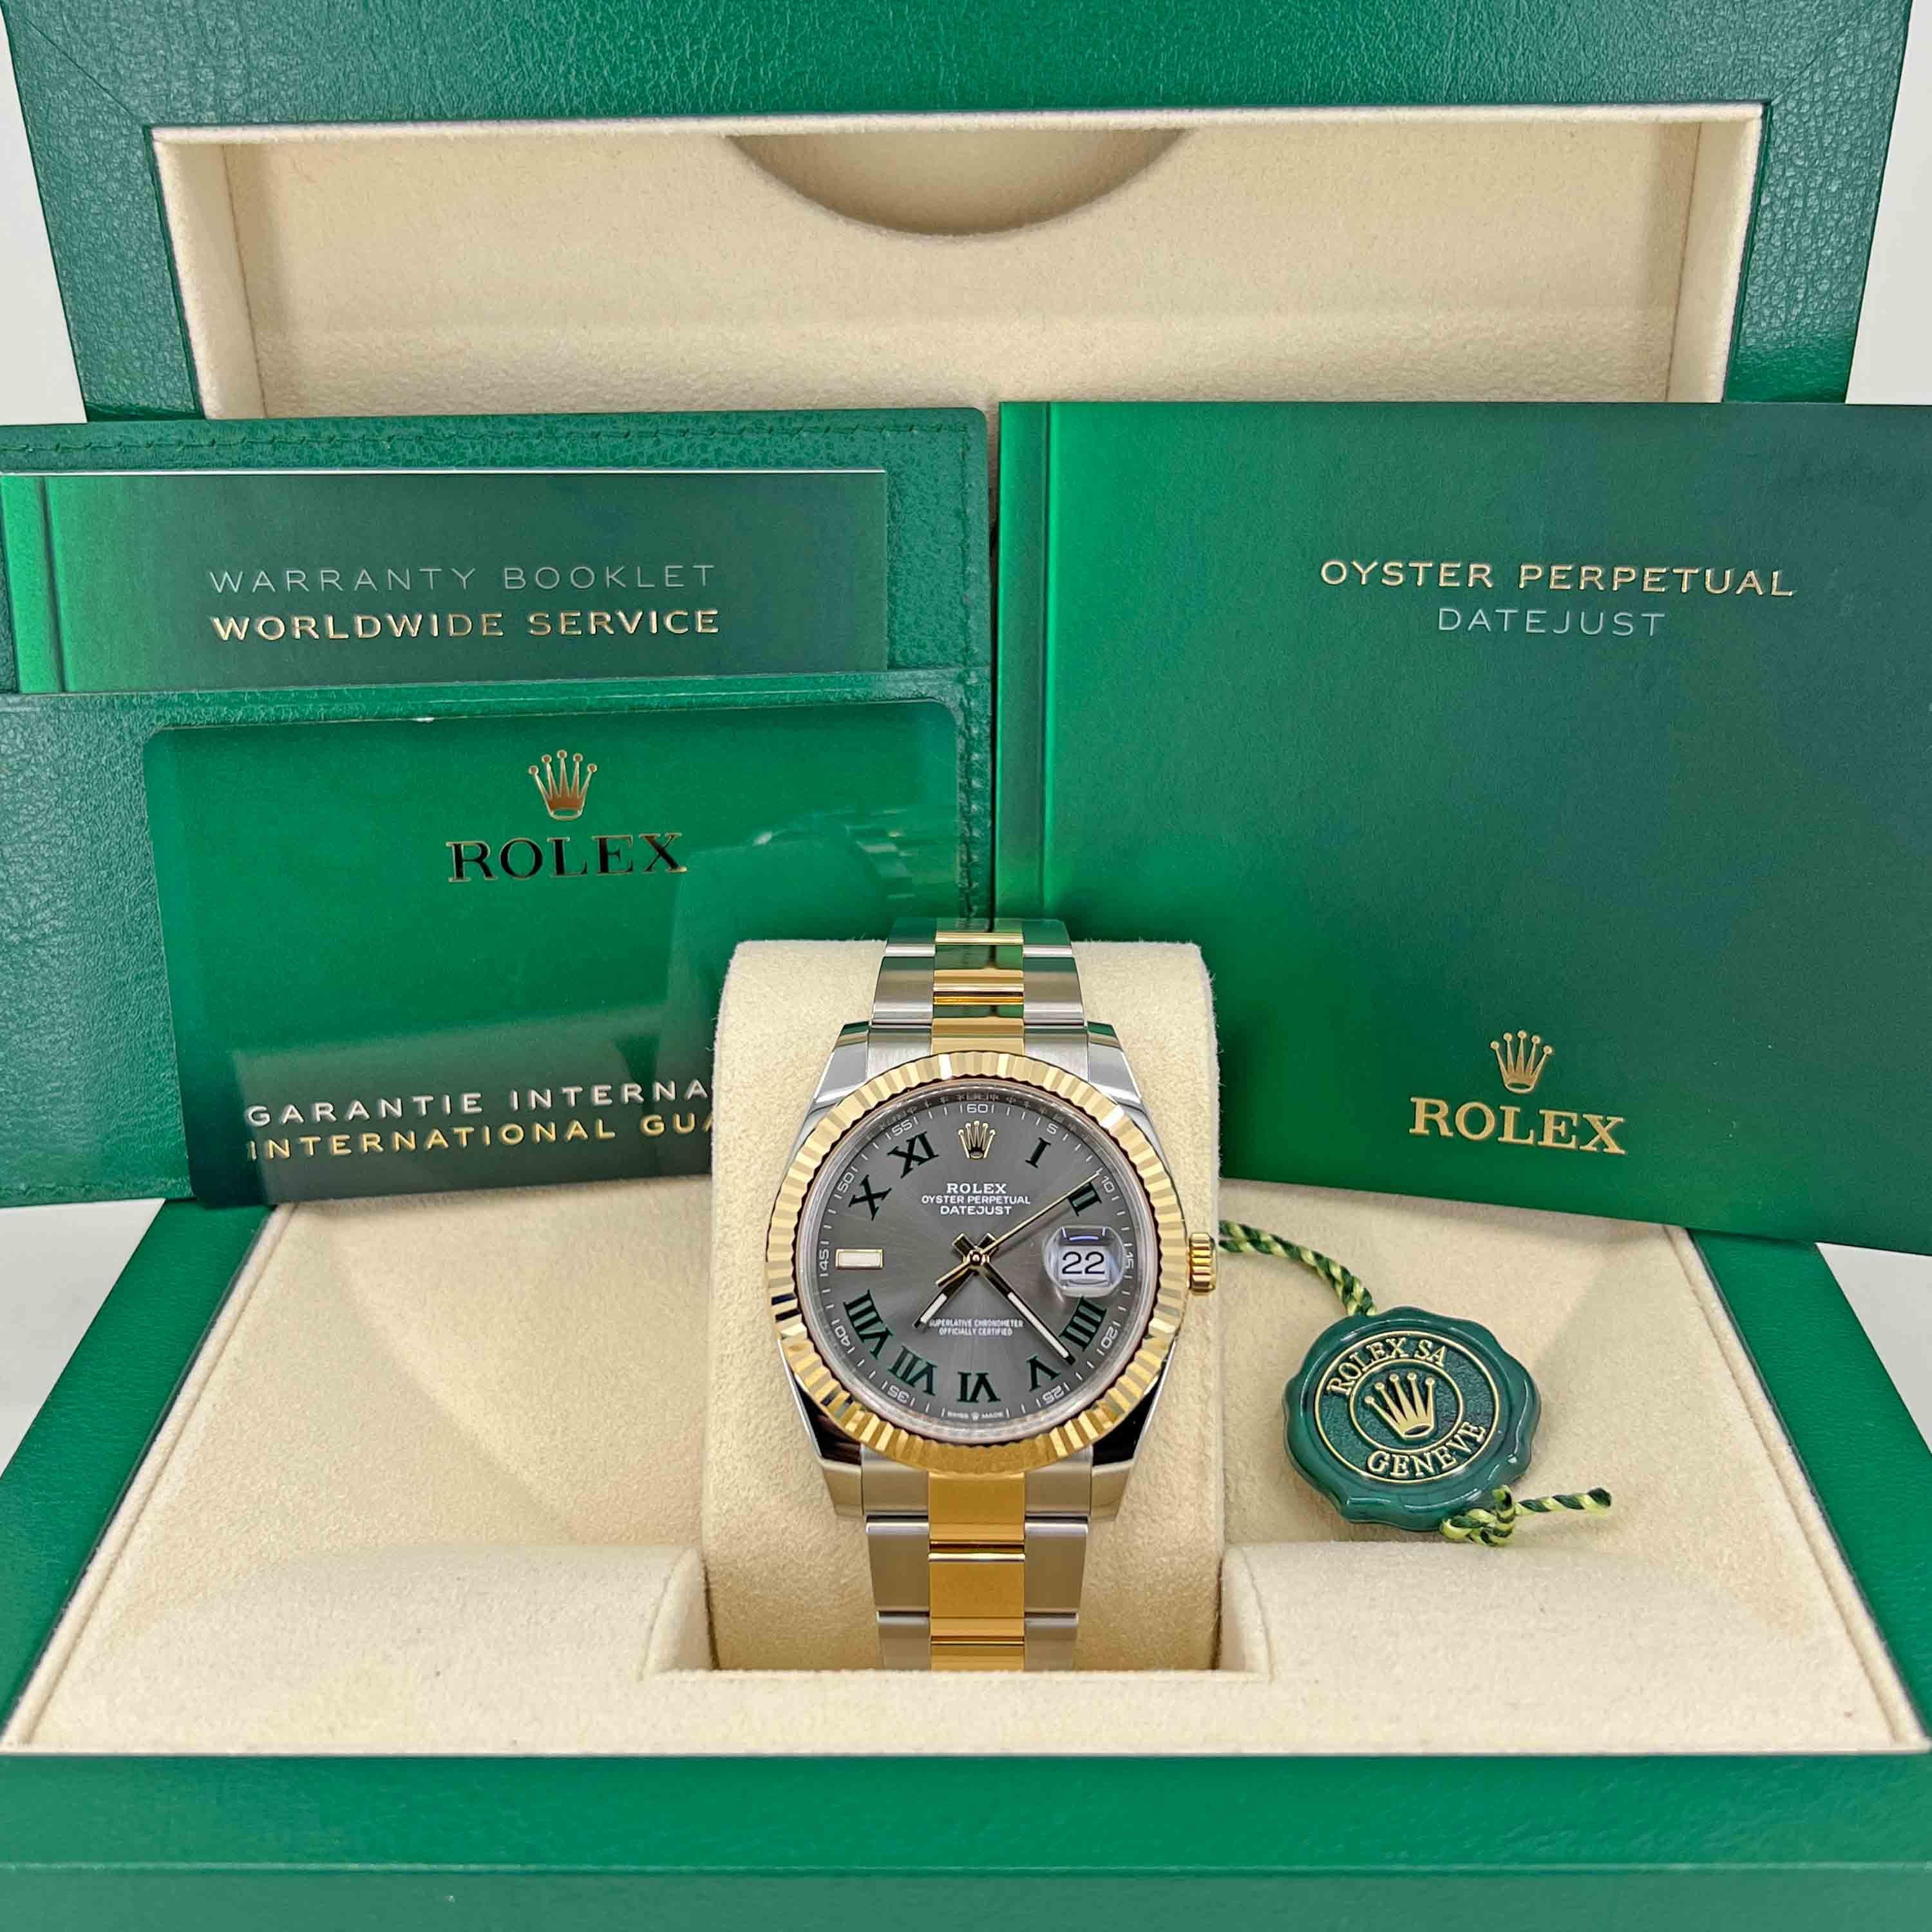 Rolex Steel and Yellow Gold Rolesor Datejust 41 Watch - Fluted Bezel - Slate Green Roman Dial - Oyster Bracelet

41 mm Yellow Rolesor case with 904L steel monobloc middle case, screw-down steel back, 18K yellow gold screw-down crown, 18K yellow gold